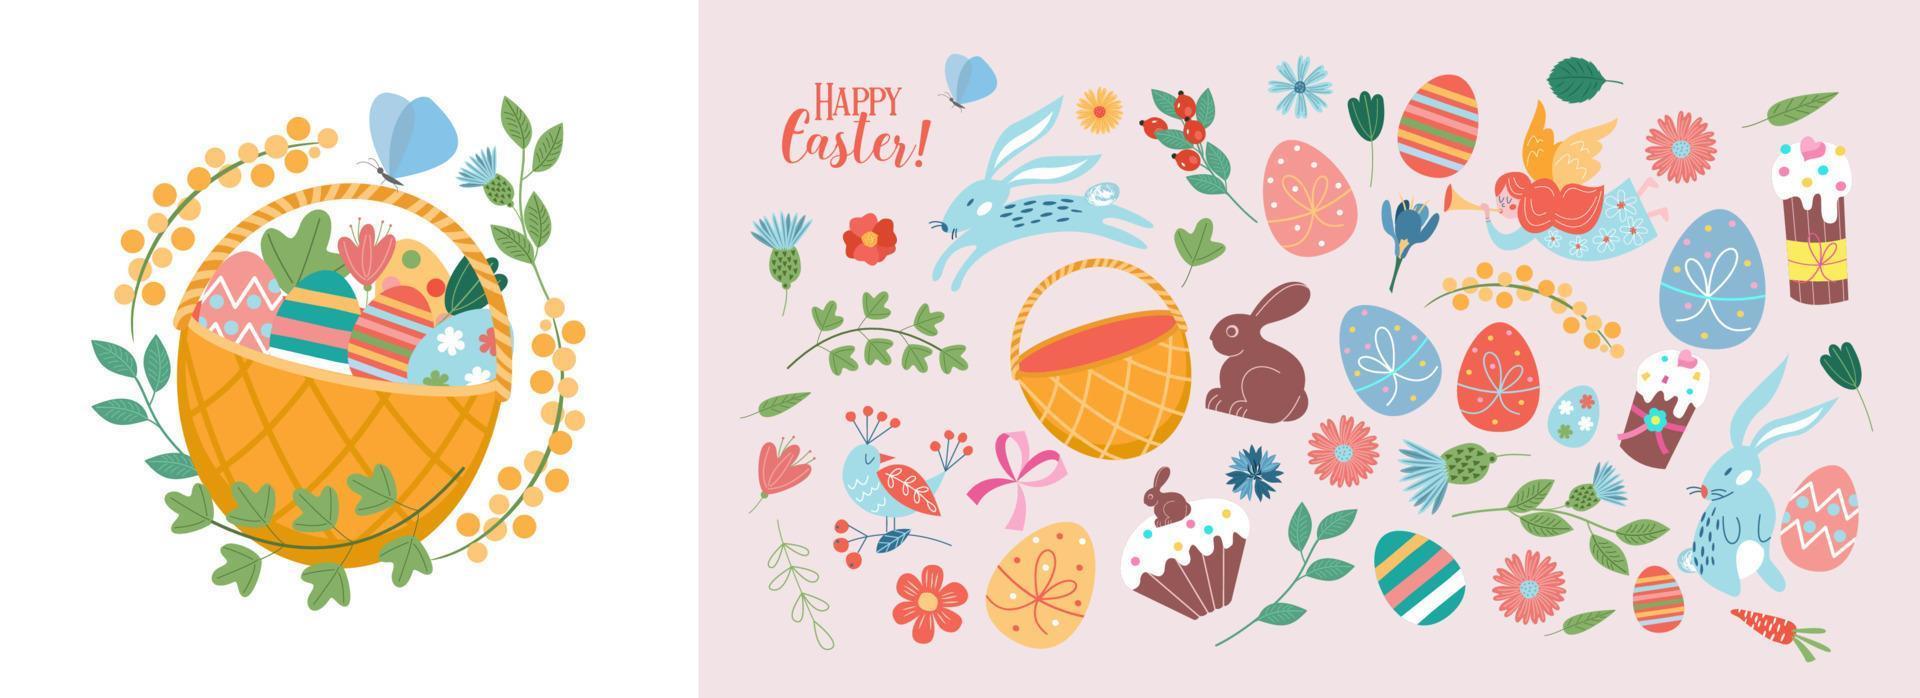 Happy Easter. Vector set of cute illustration. Painted eggs, rabbits, flowers, a basket, a chocolate hare, cakes. Design elements for card, poster, flyer and other use.